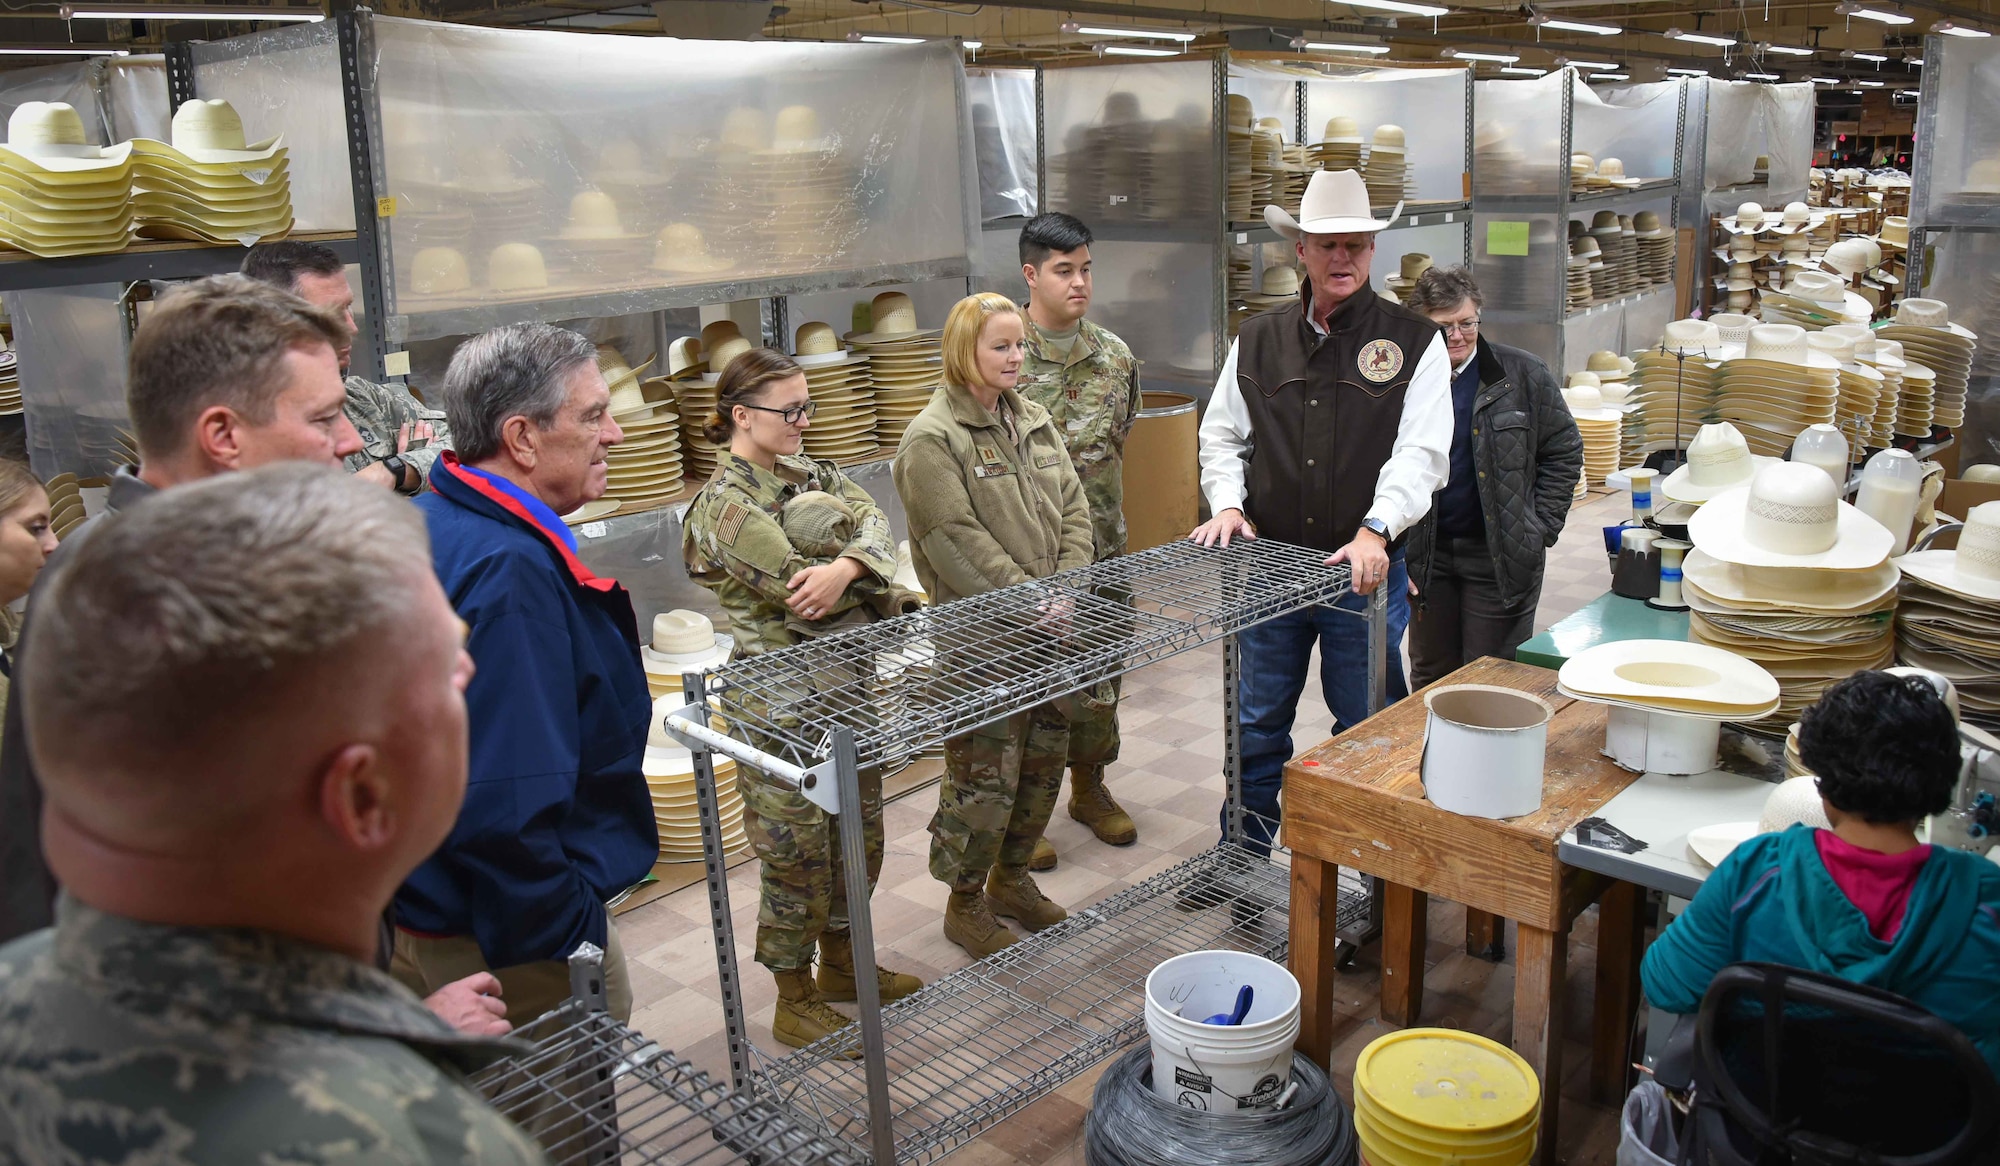 301st Fighter Wing Aircraft Maintenance Squadron Honorary Commander Mr. Keith Mundee (wearing cowboy hat), who is also the president of American Hat Co., led several members of the wing's leadership on a tour of American Hat Company in Bowie, Texas on November 15, 2019. The 301st Fighter Wing Honorary Commanders Program has invited civic leaders to many behind-the-scenes military tours but this was the first time we were hosted by one of our honorary commanders. (U.S. Air Force photo by Mr. Jeremy Roman)